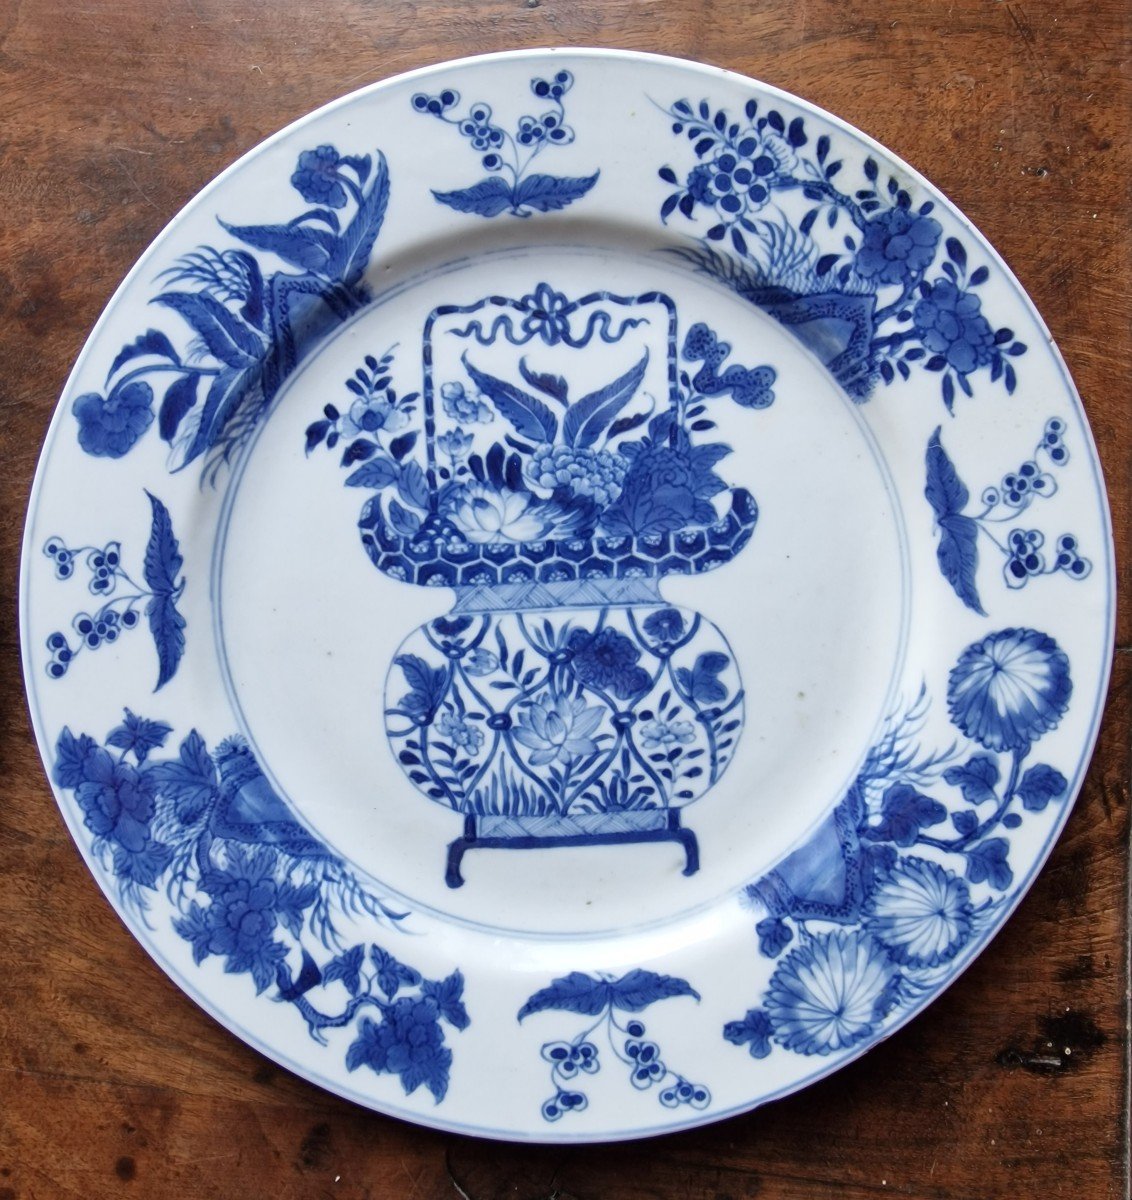 Pair Of Chinese Dinner Plates 18th Kangxi Period White Blue Qing Dynasty-photo-3